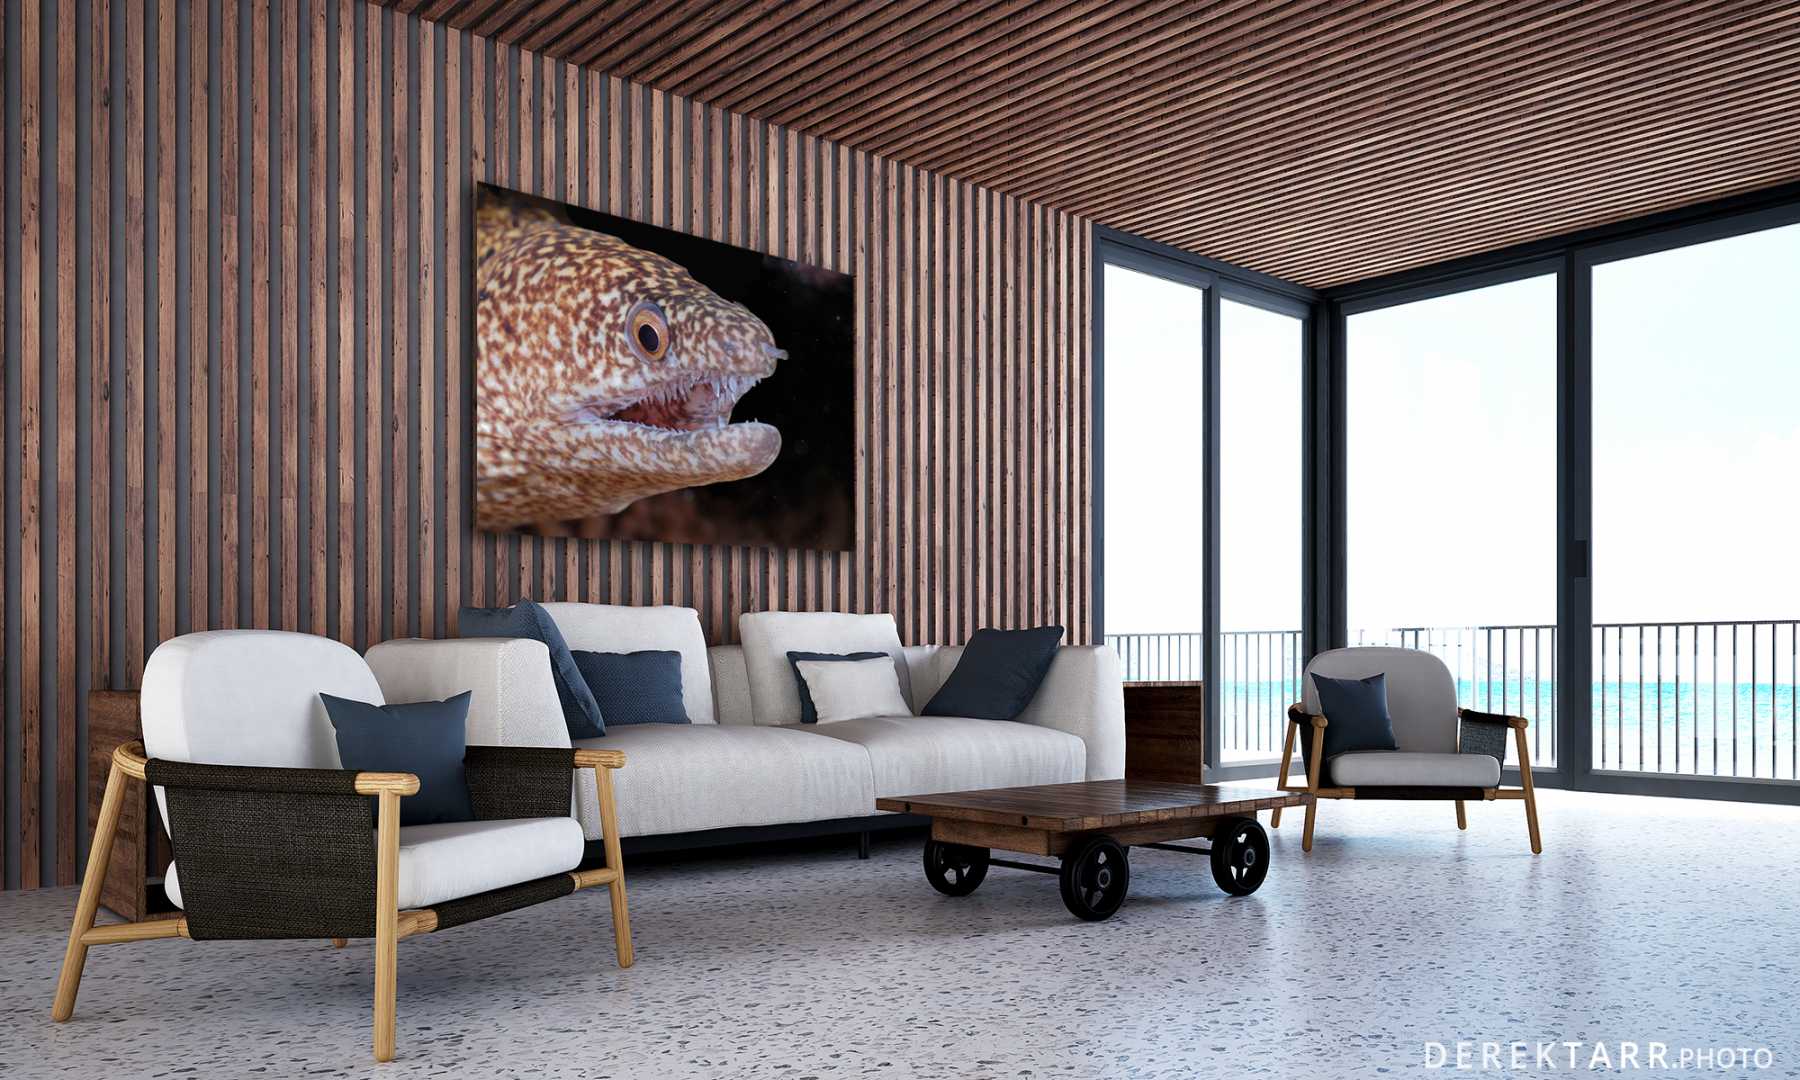 Ocean front living room with Stout Moray photo on wall